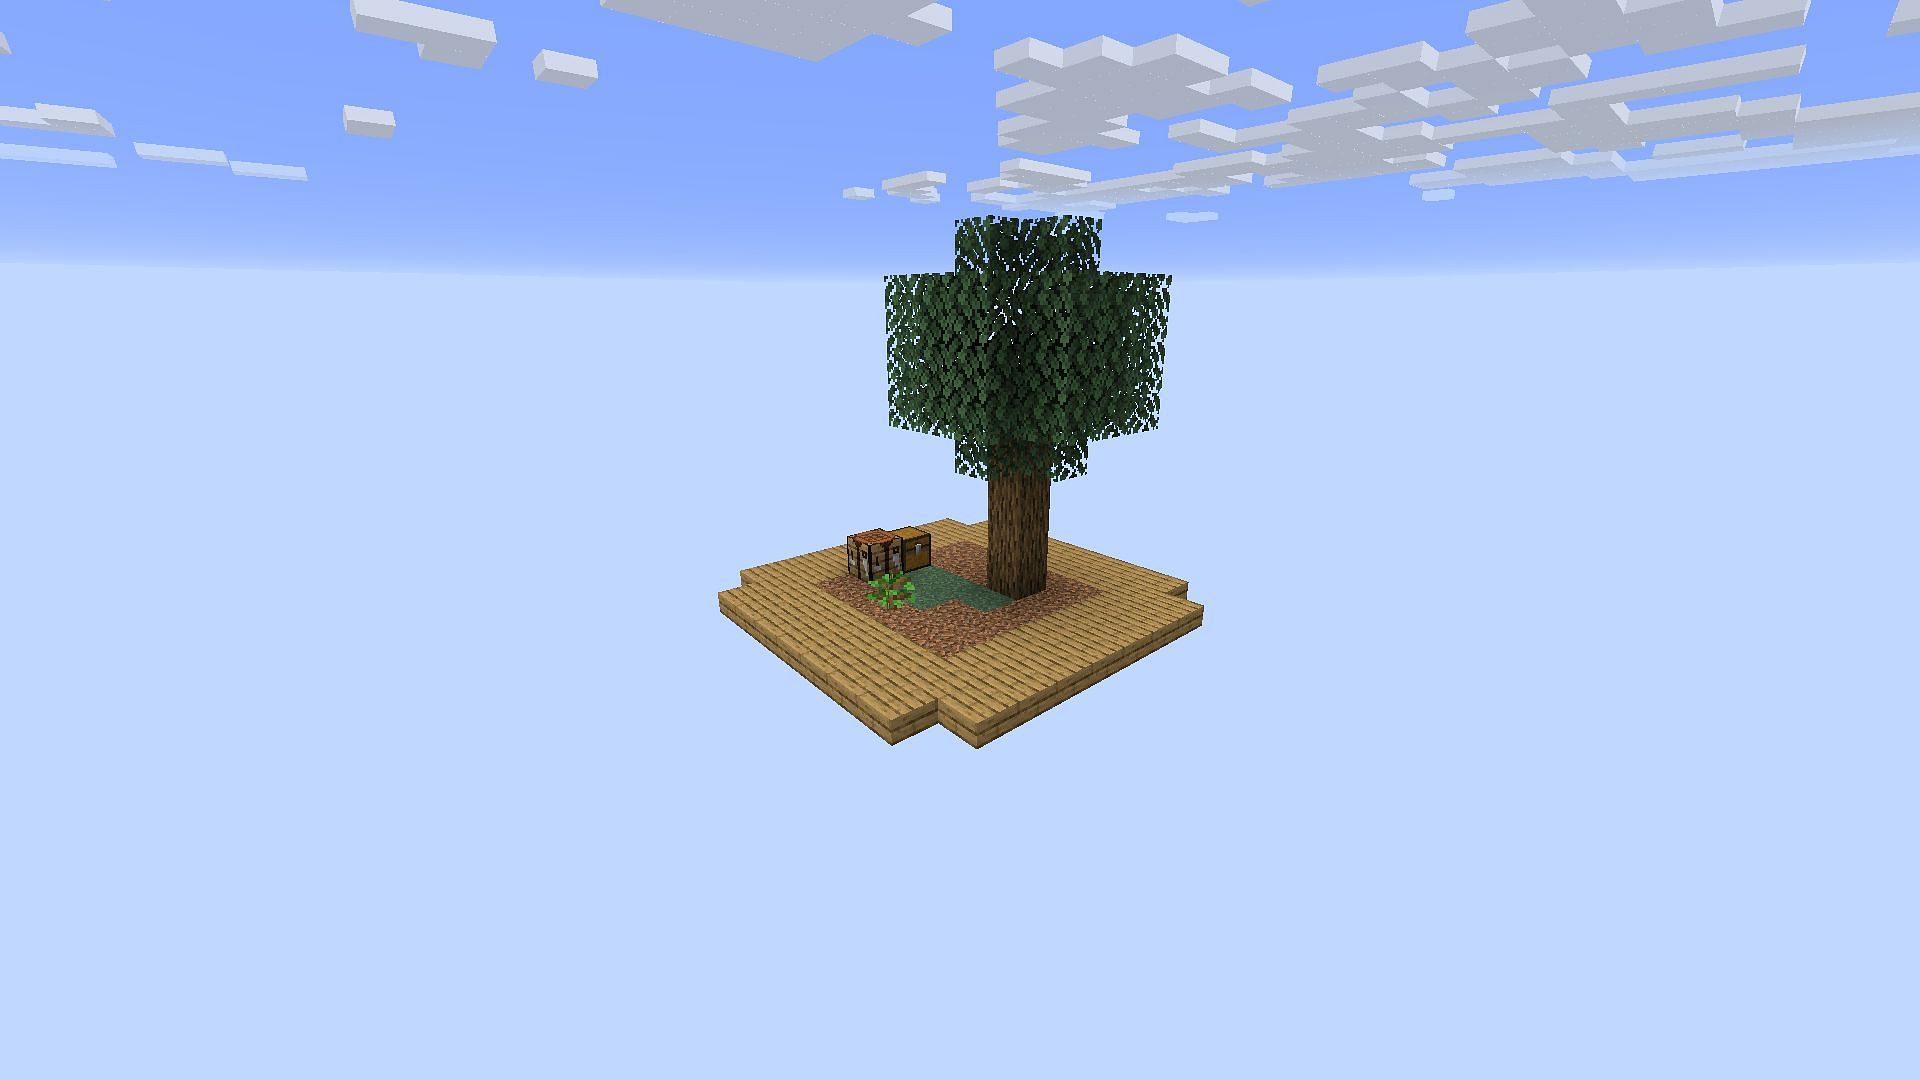 A new skyblock world, and surrounding wooden slab platforms (Image via Minecraft)